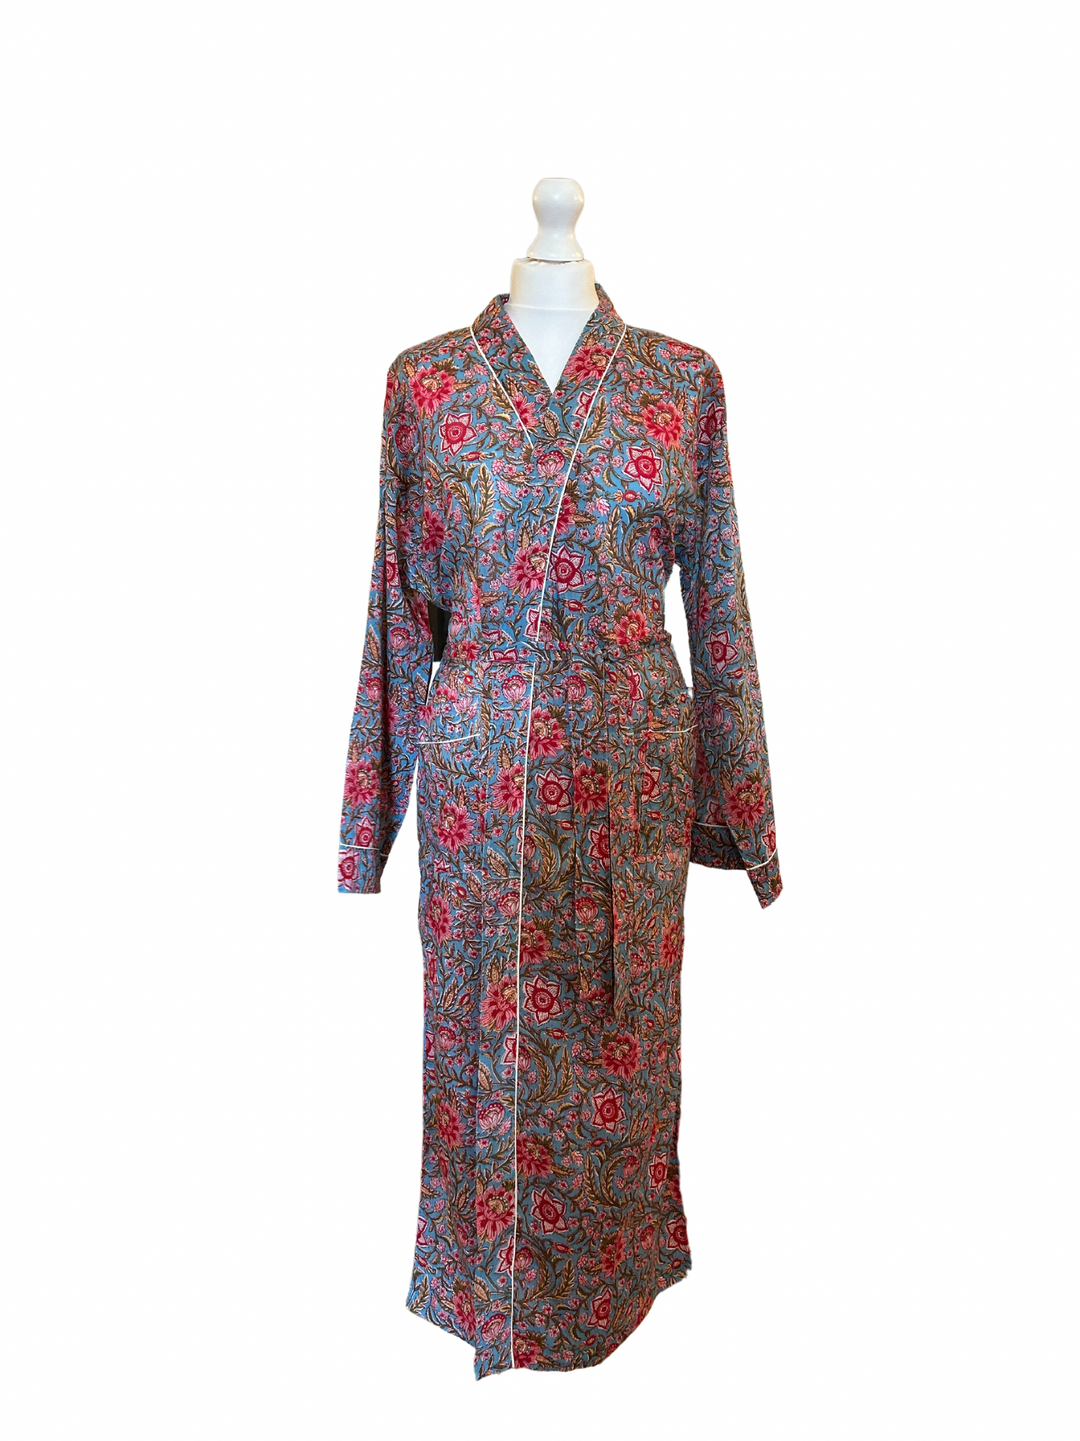 Lucy Robe / Dressing Gown - Parasol-UK